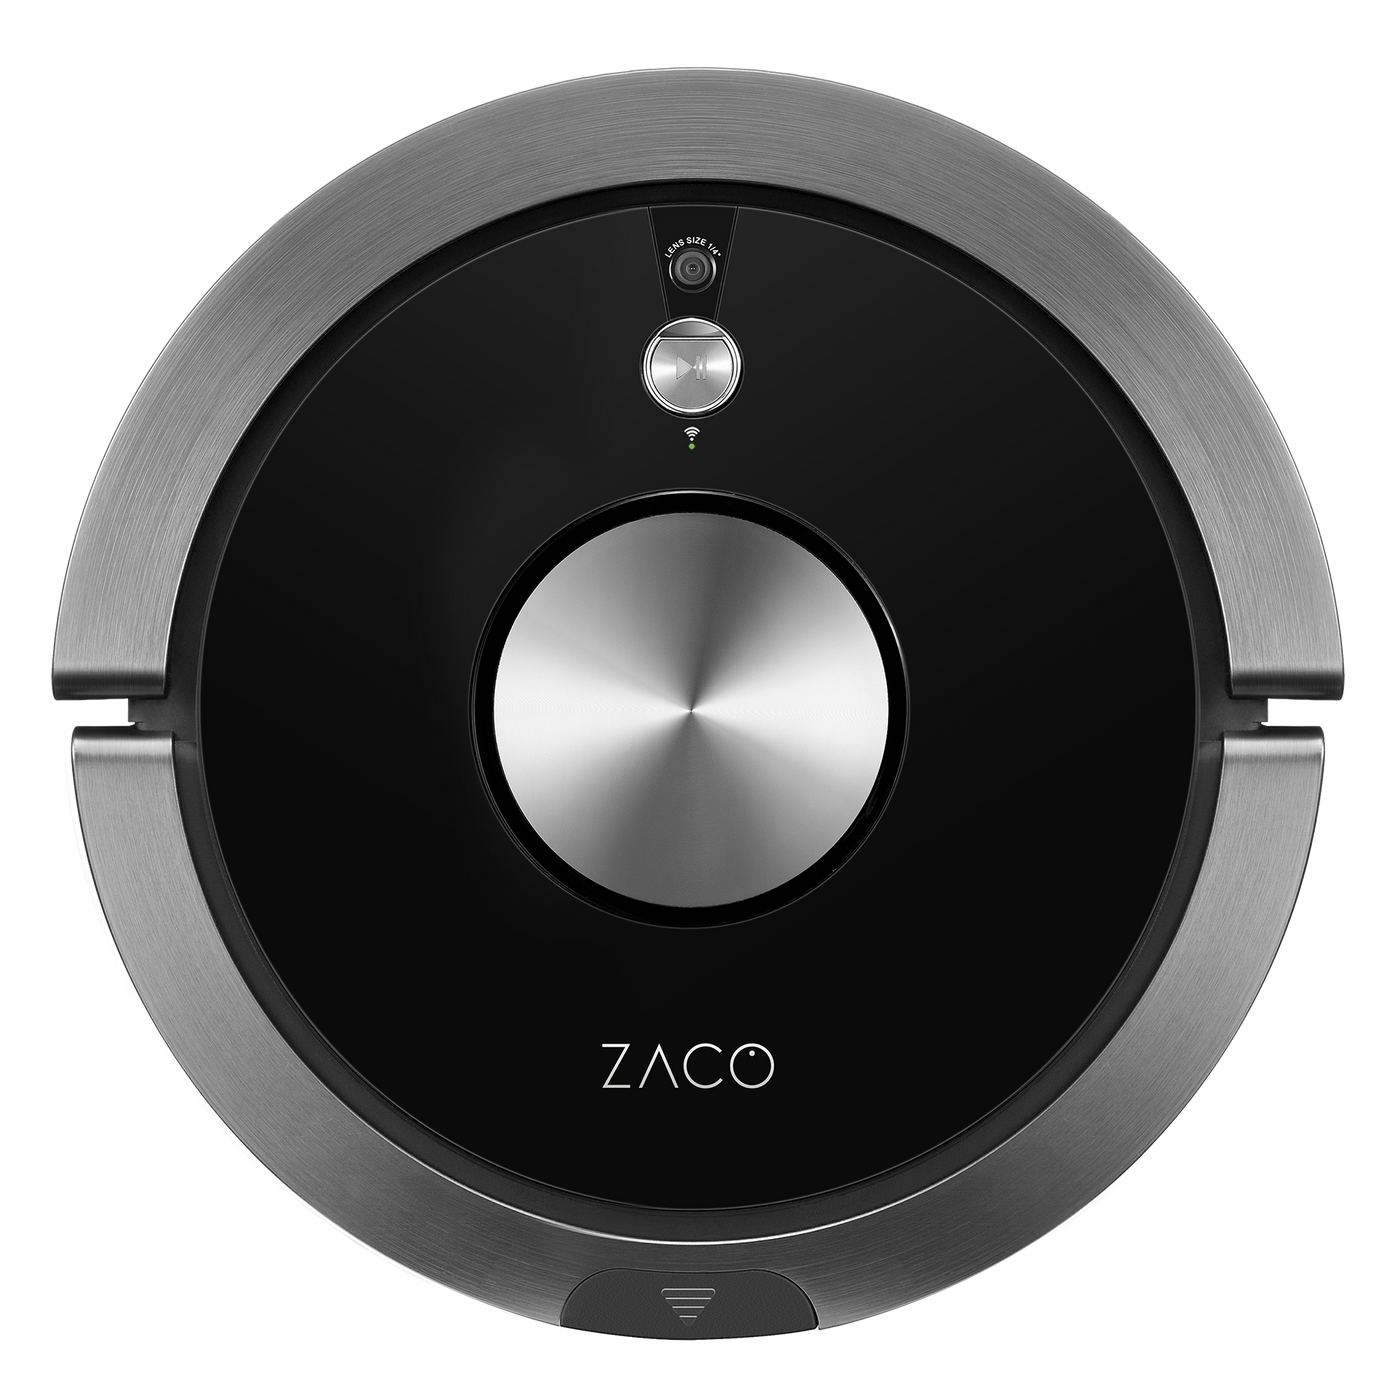 ZACO A9s vacuuming and mopping robot